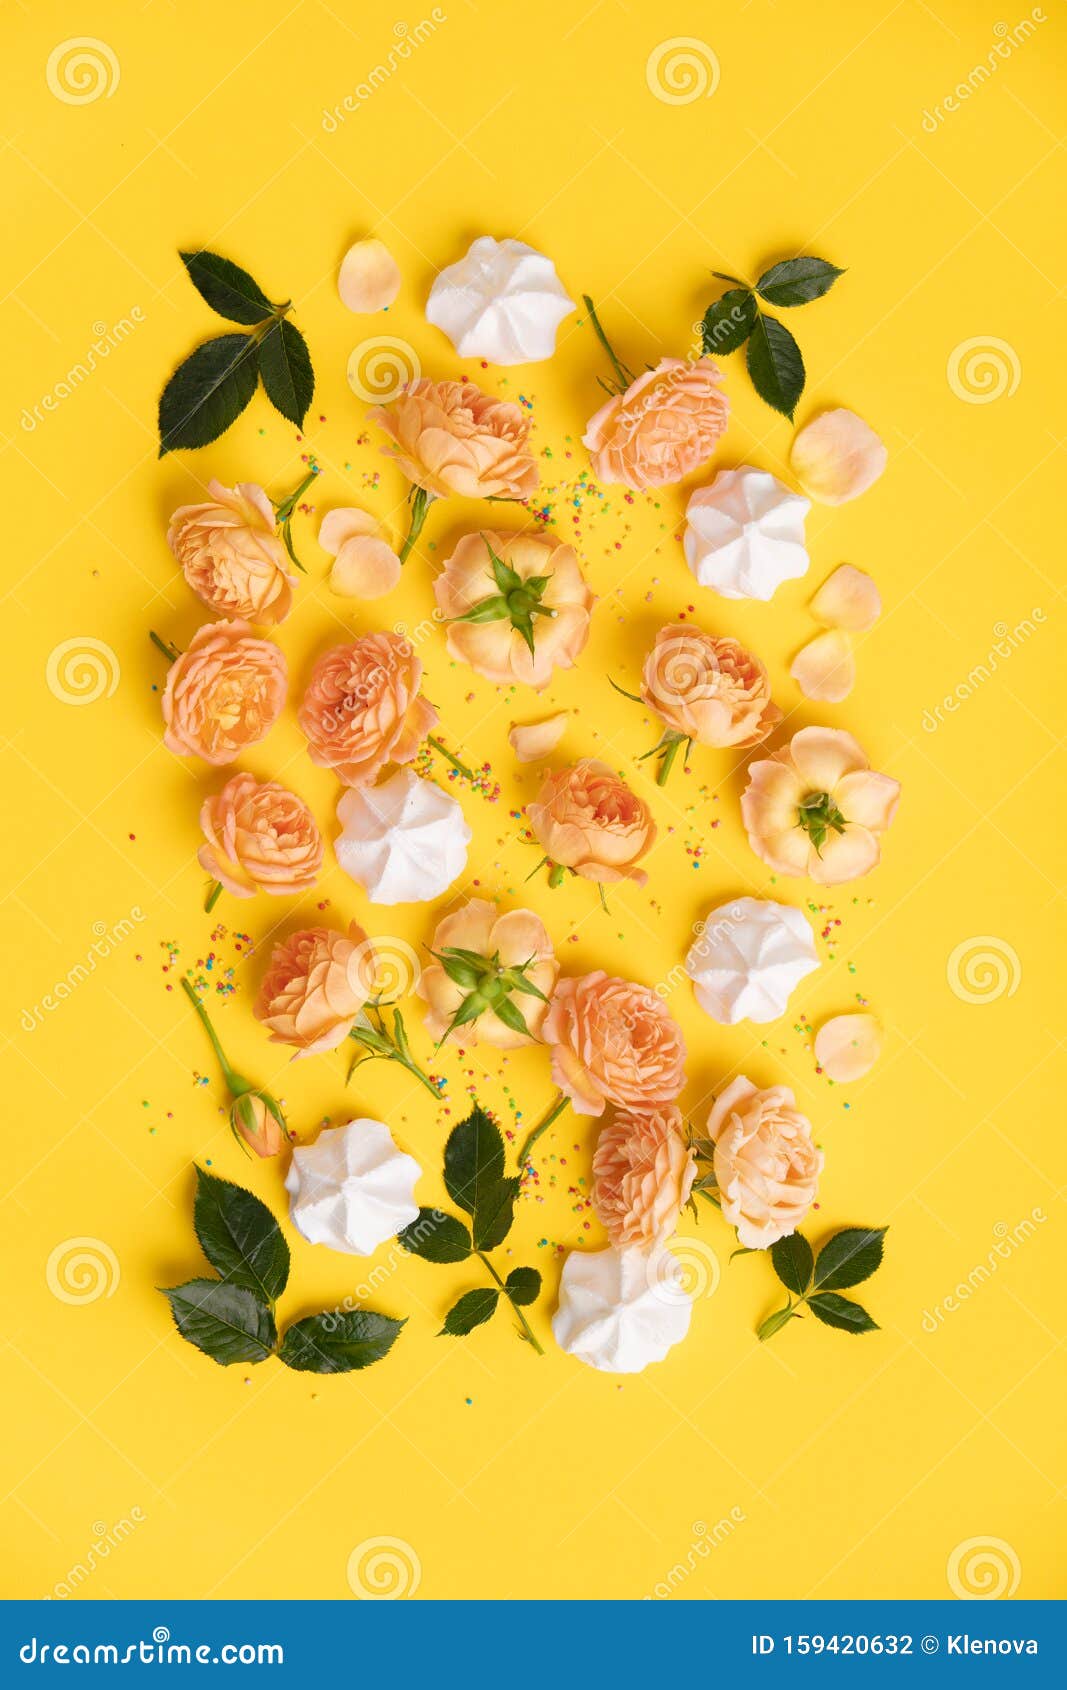 Floral pattern with red roses, petals and leaves on white